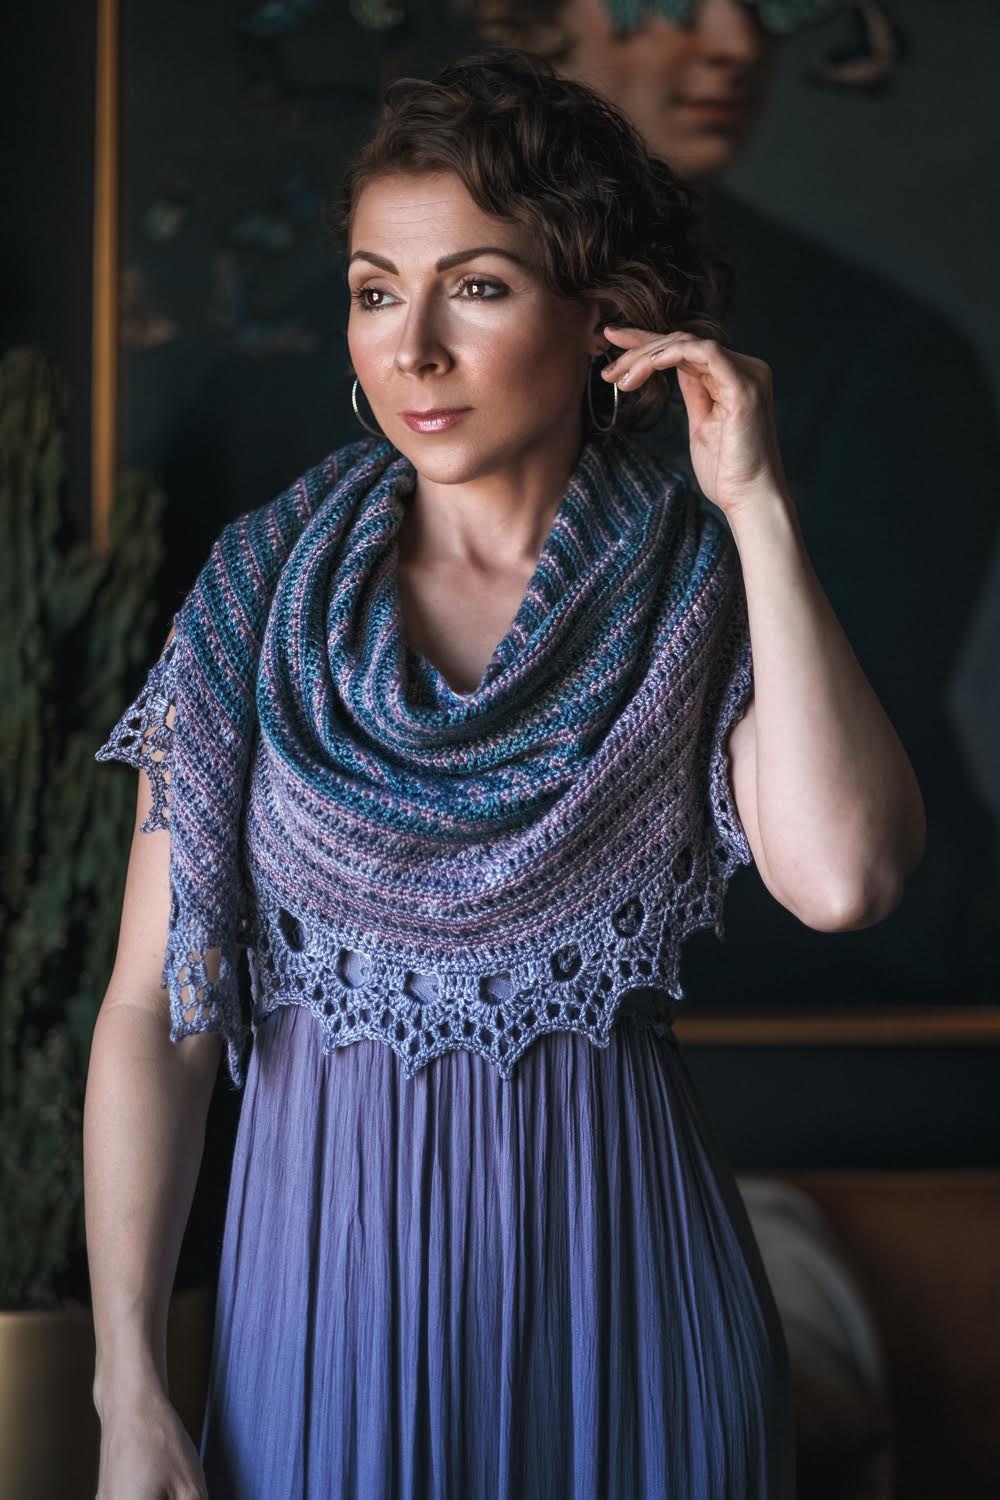 How to Wear a Shawl? - The Ultimate Tutorial